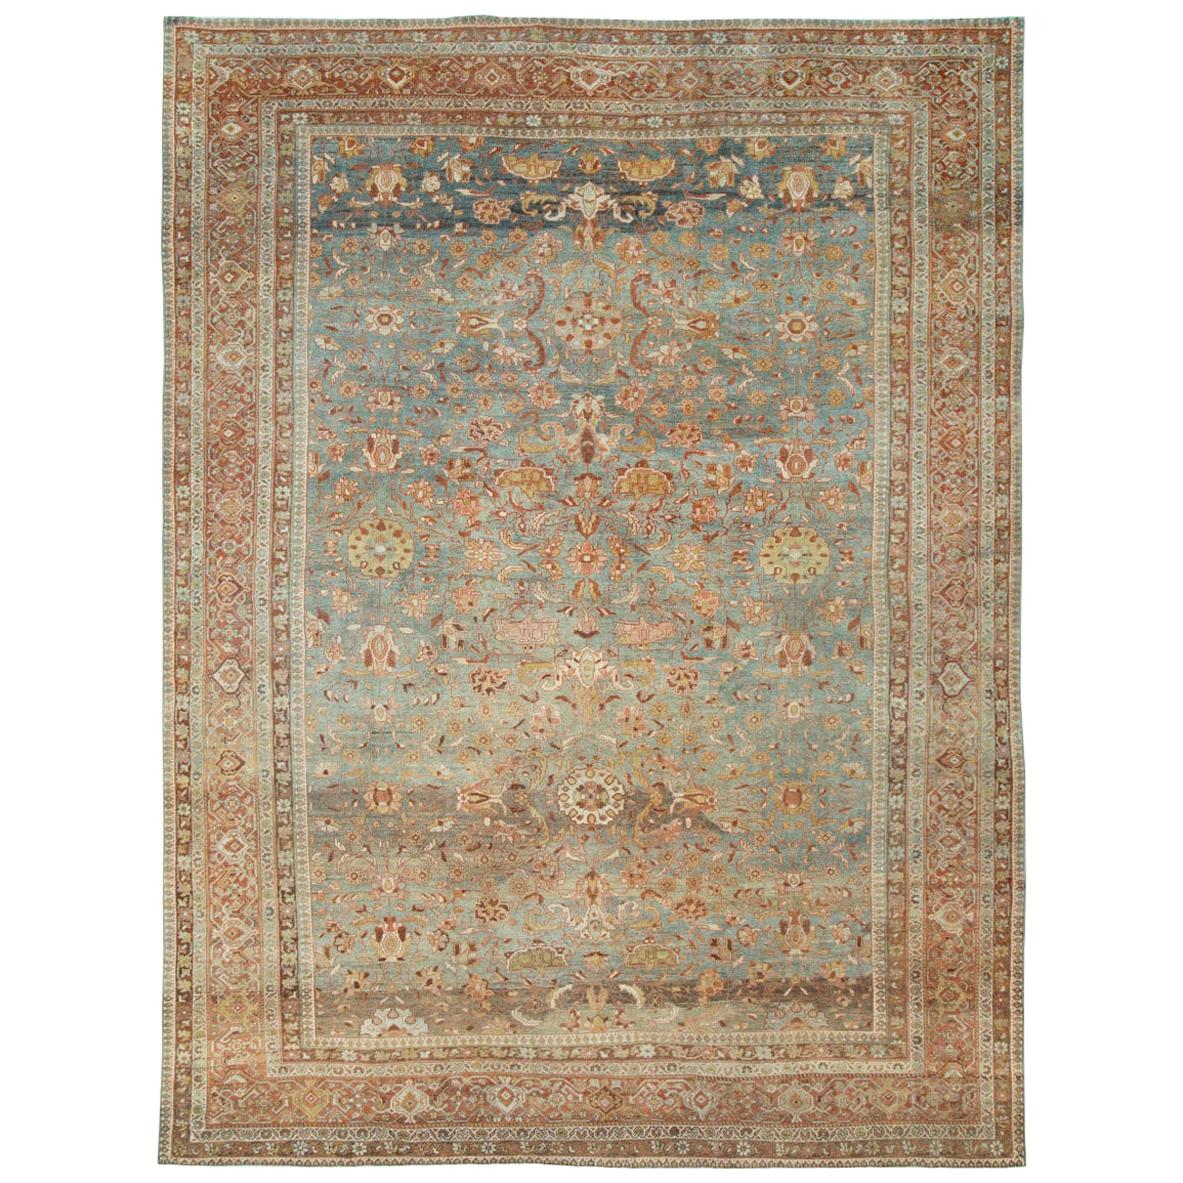 Early 20th Century Handmade Persian Mahal Room Size Carpet in Rust and Seafoam